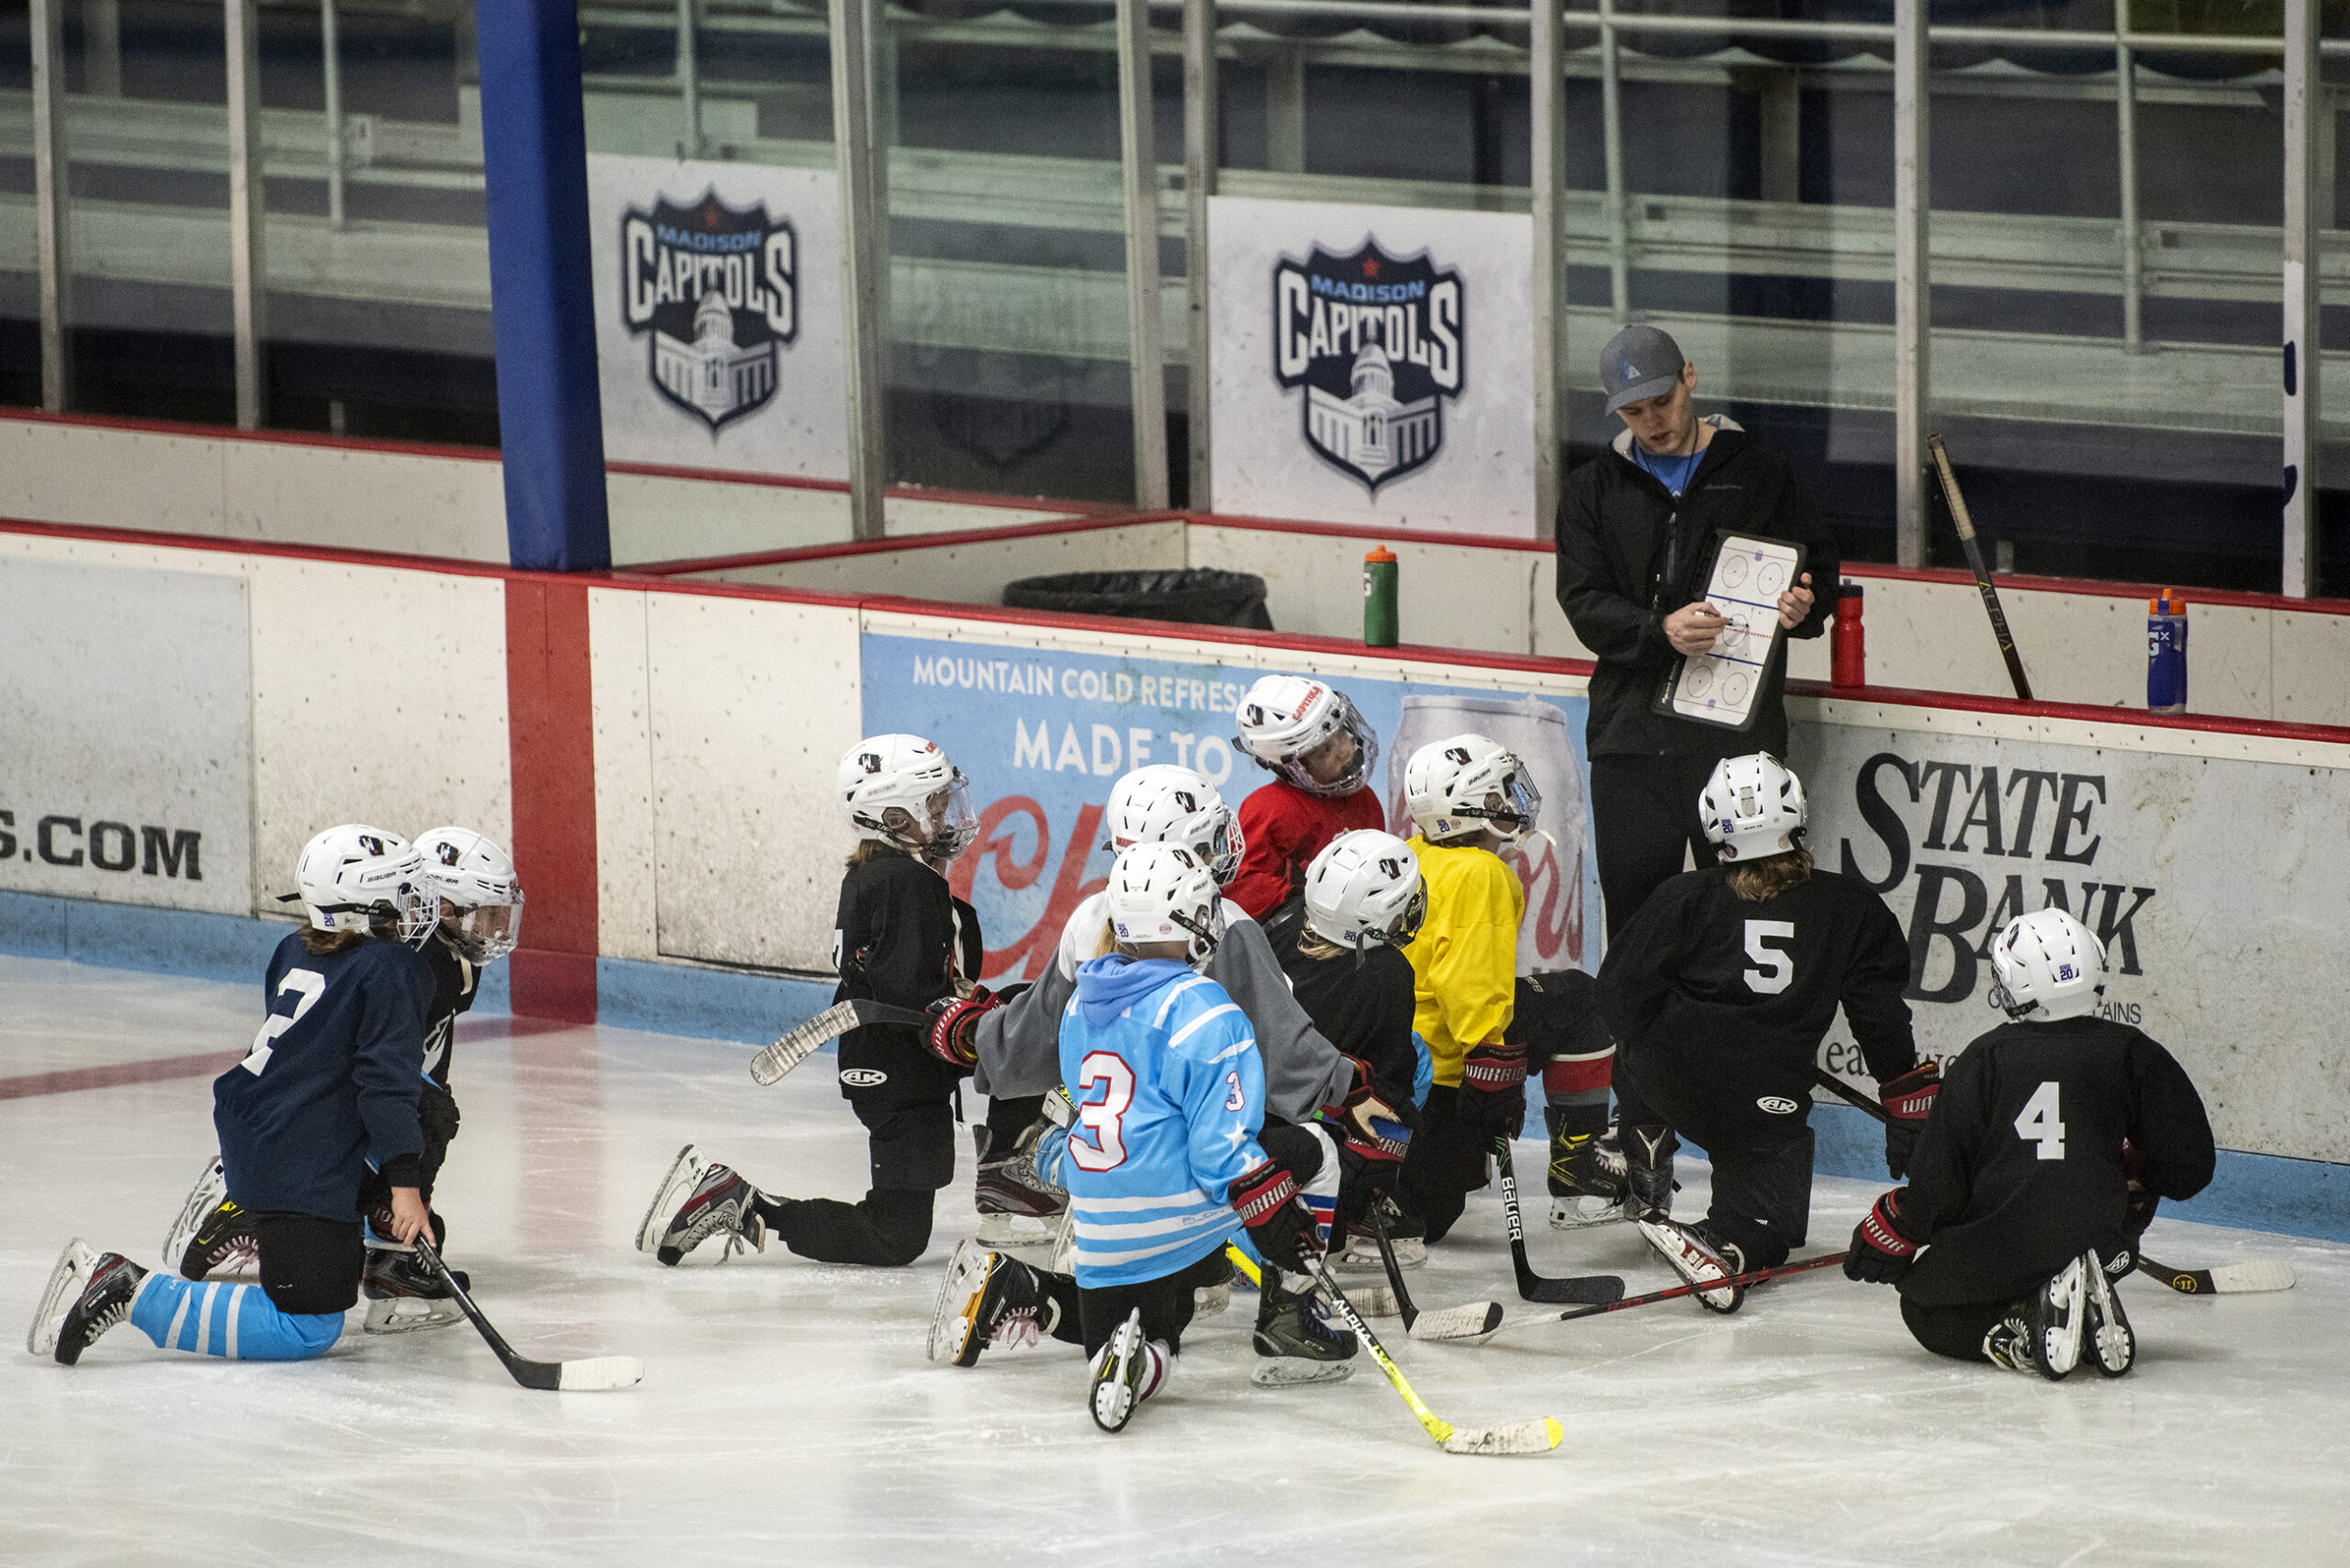 A group of youth hockey players kneel on the ice as a coach speaks to them.